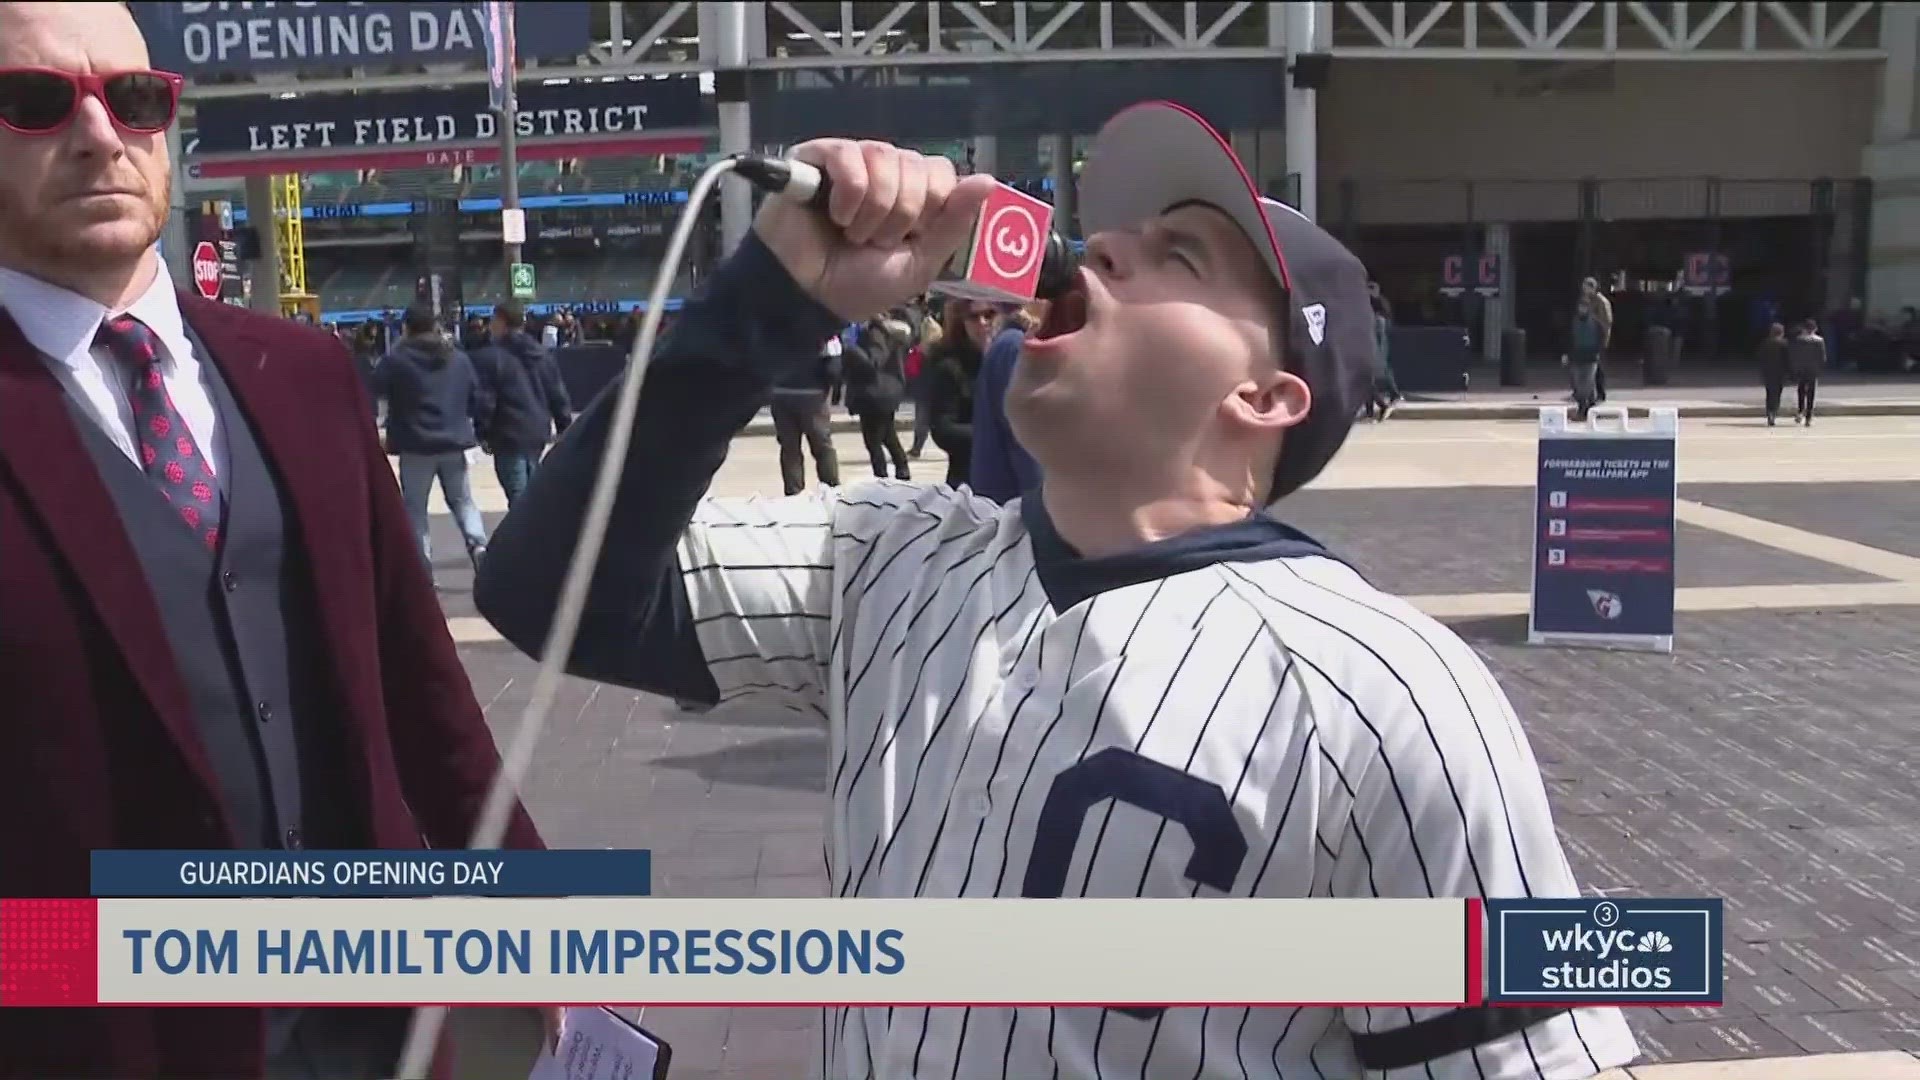 Tom Hamilton is a baseball legend, but how good are Cleveland Guardians fans at impersonating his epic calls?